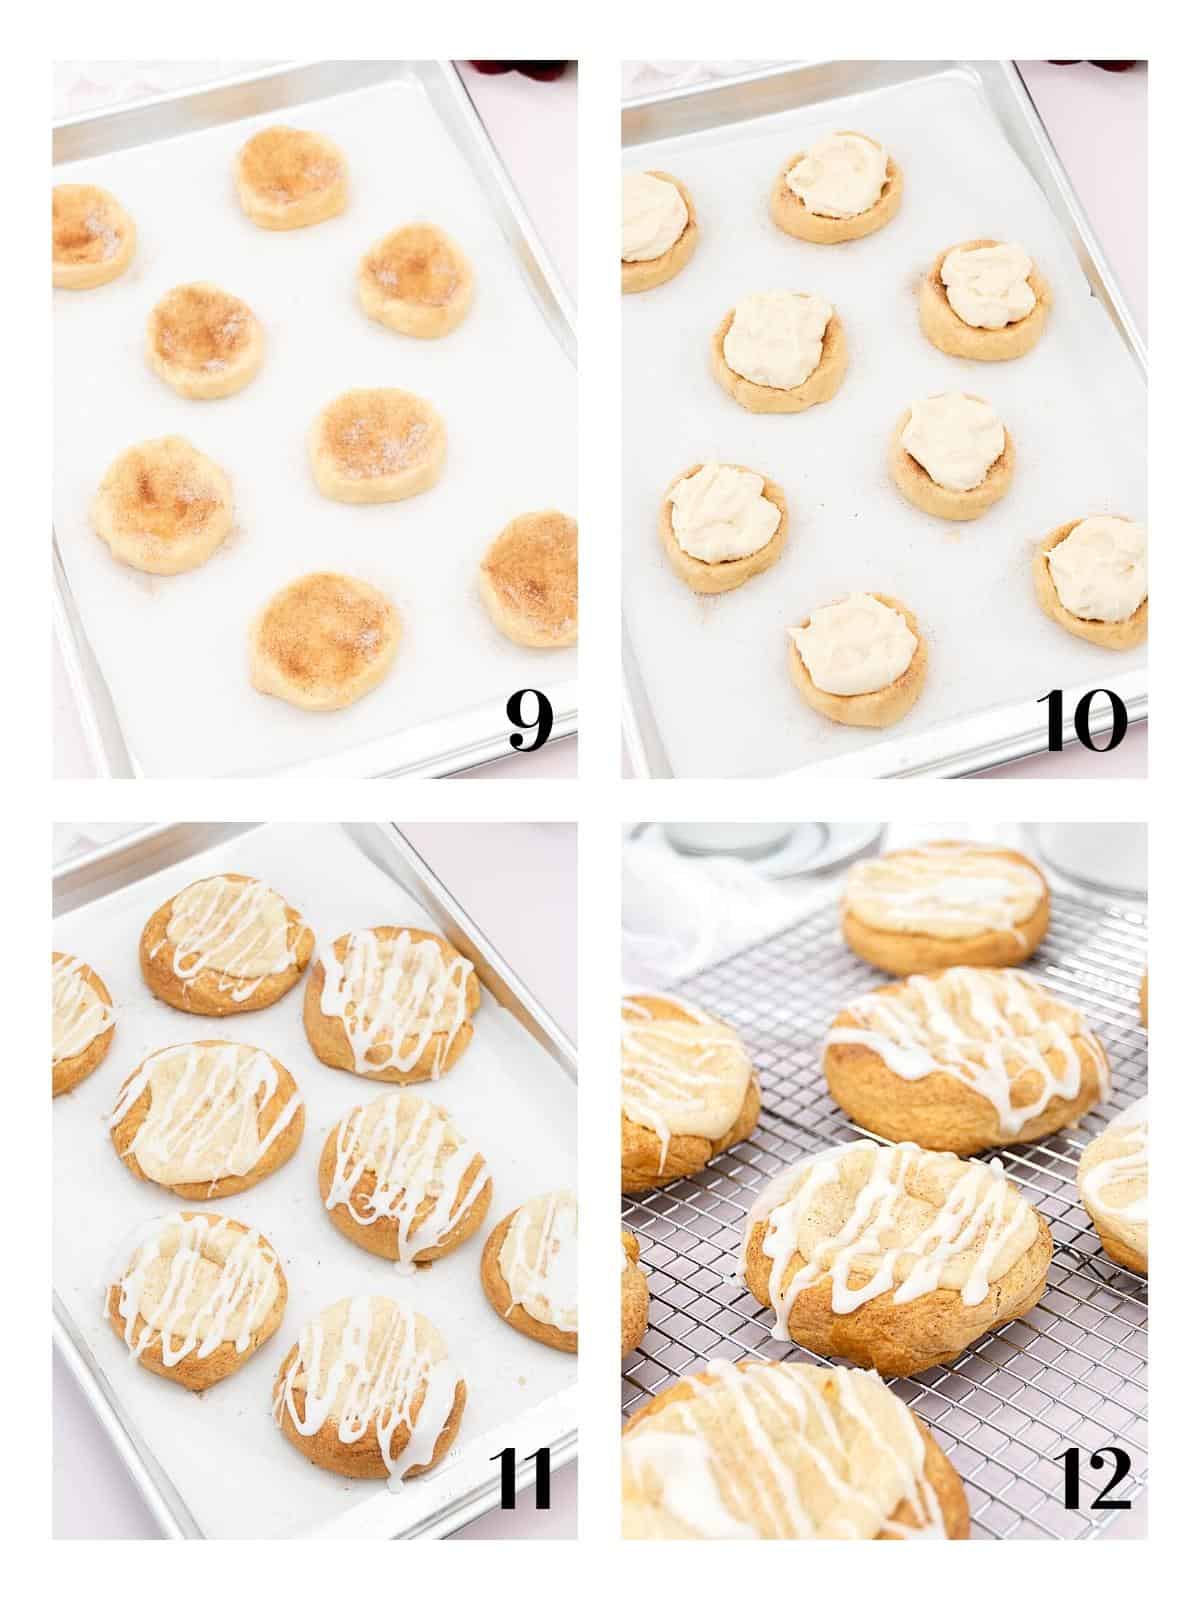 Baking and cooling cream cheese danishes collage.